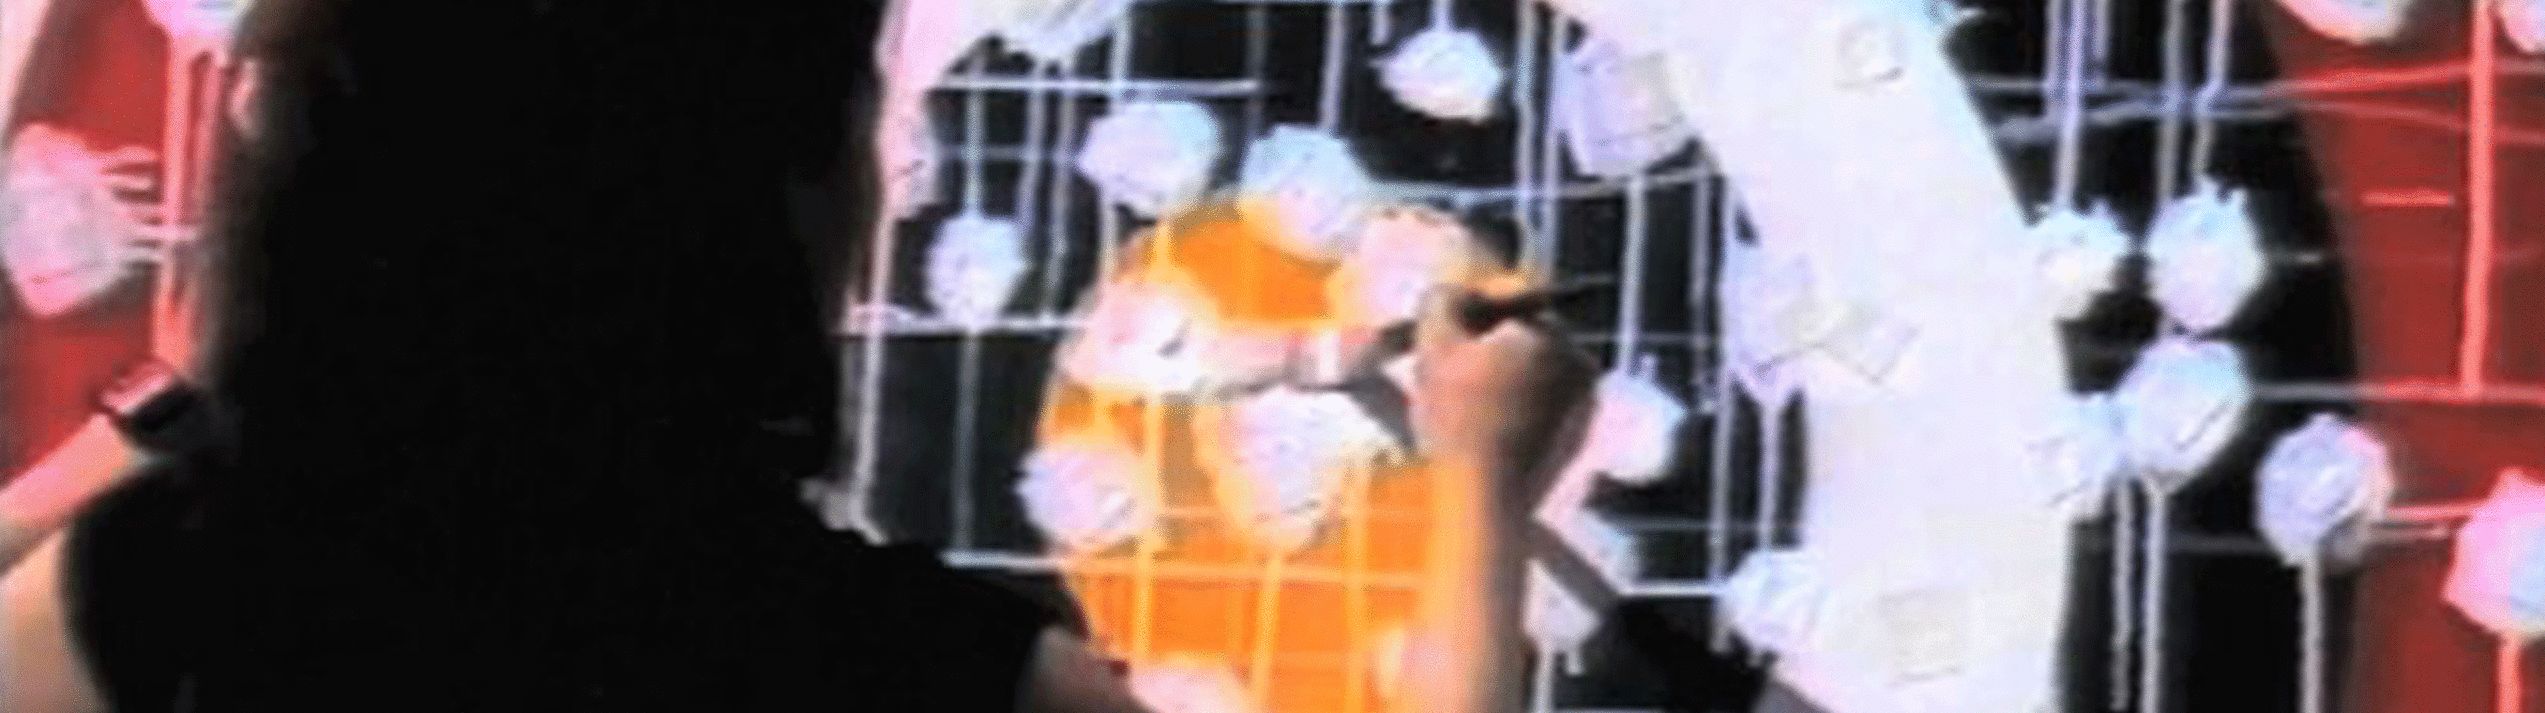 Read more about Meet Asia's female video art pioneers